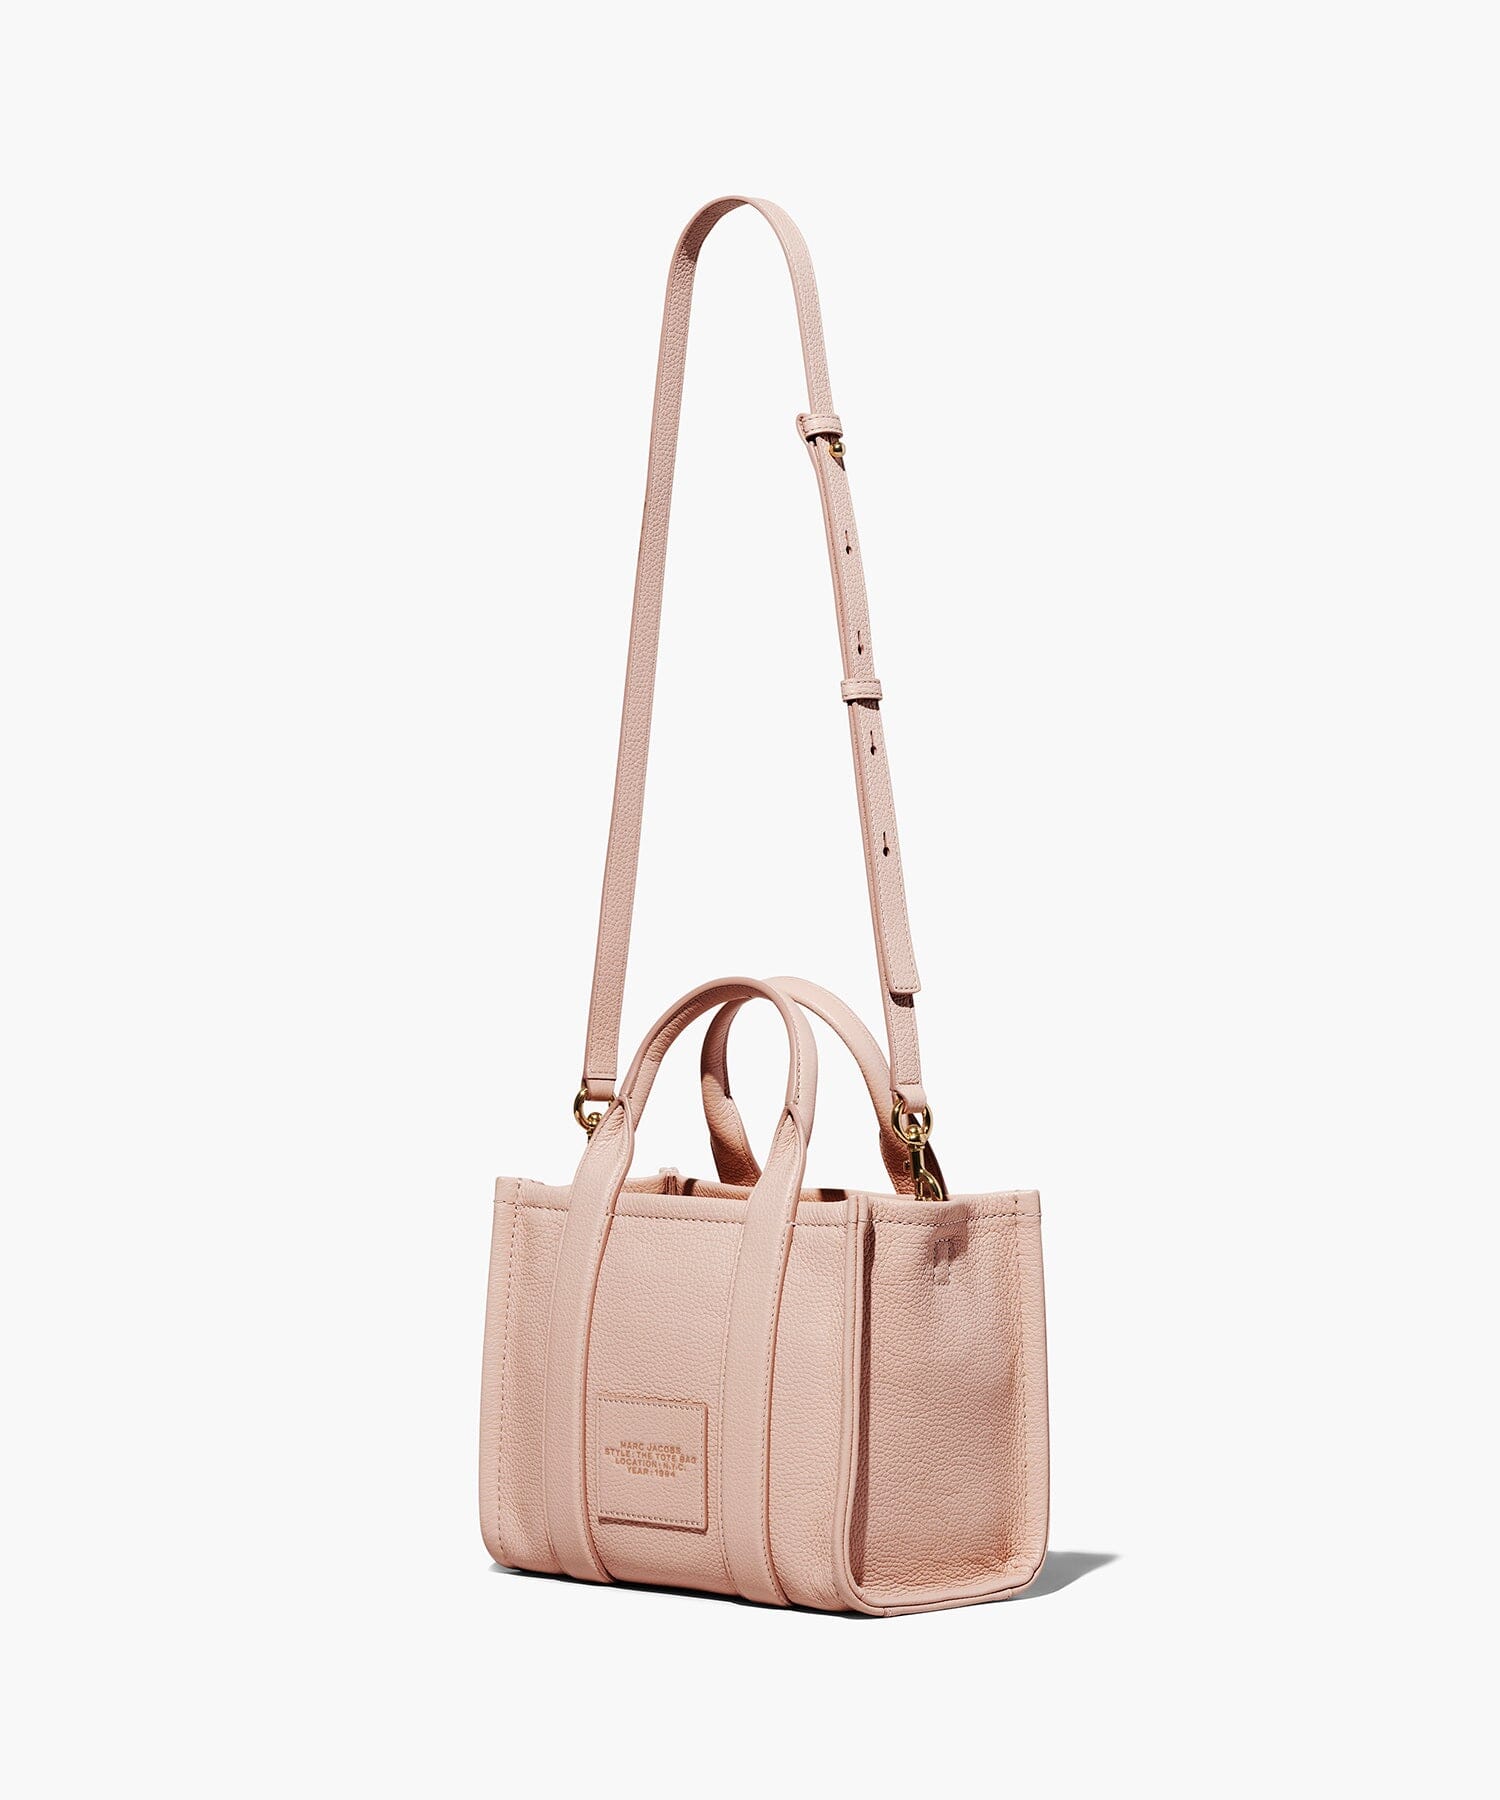 MARC JACOBS - H009L01SP21-624 - The Leather Small Tote Bag - Rose Borse Marc Jacobs 